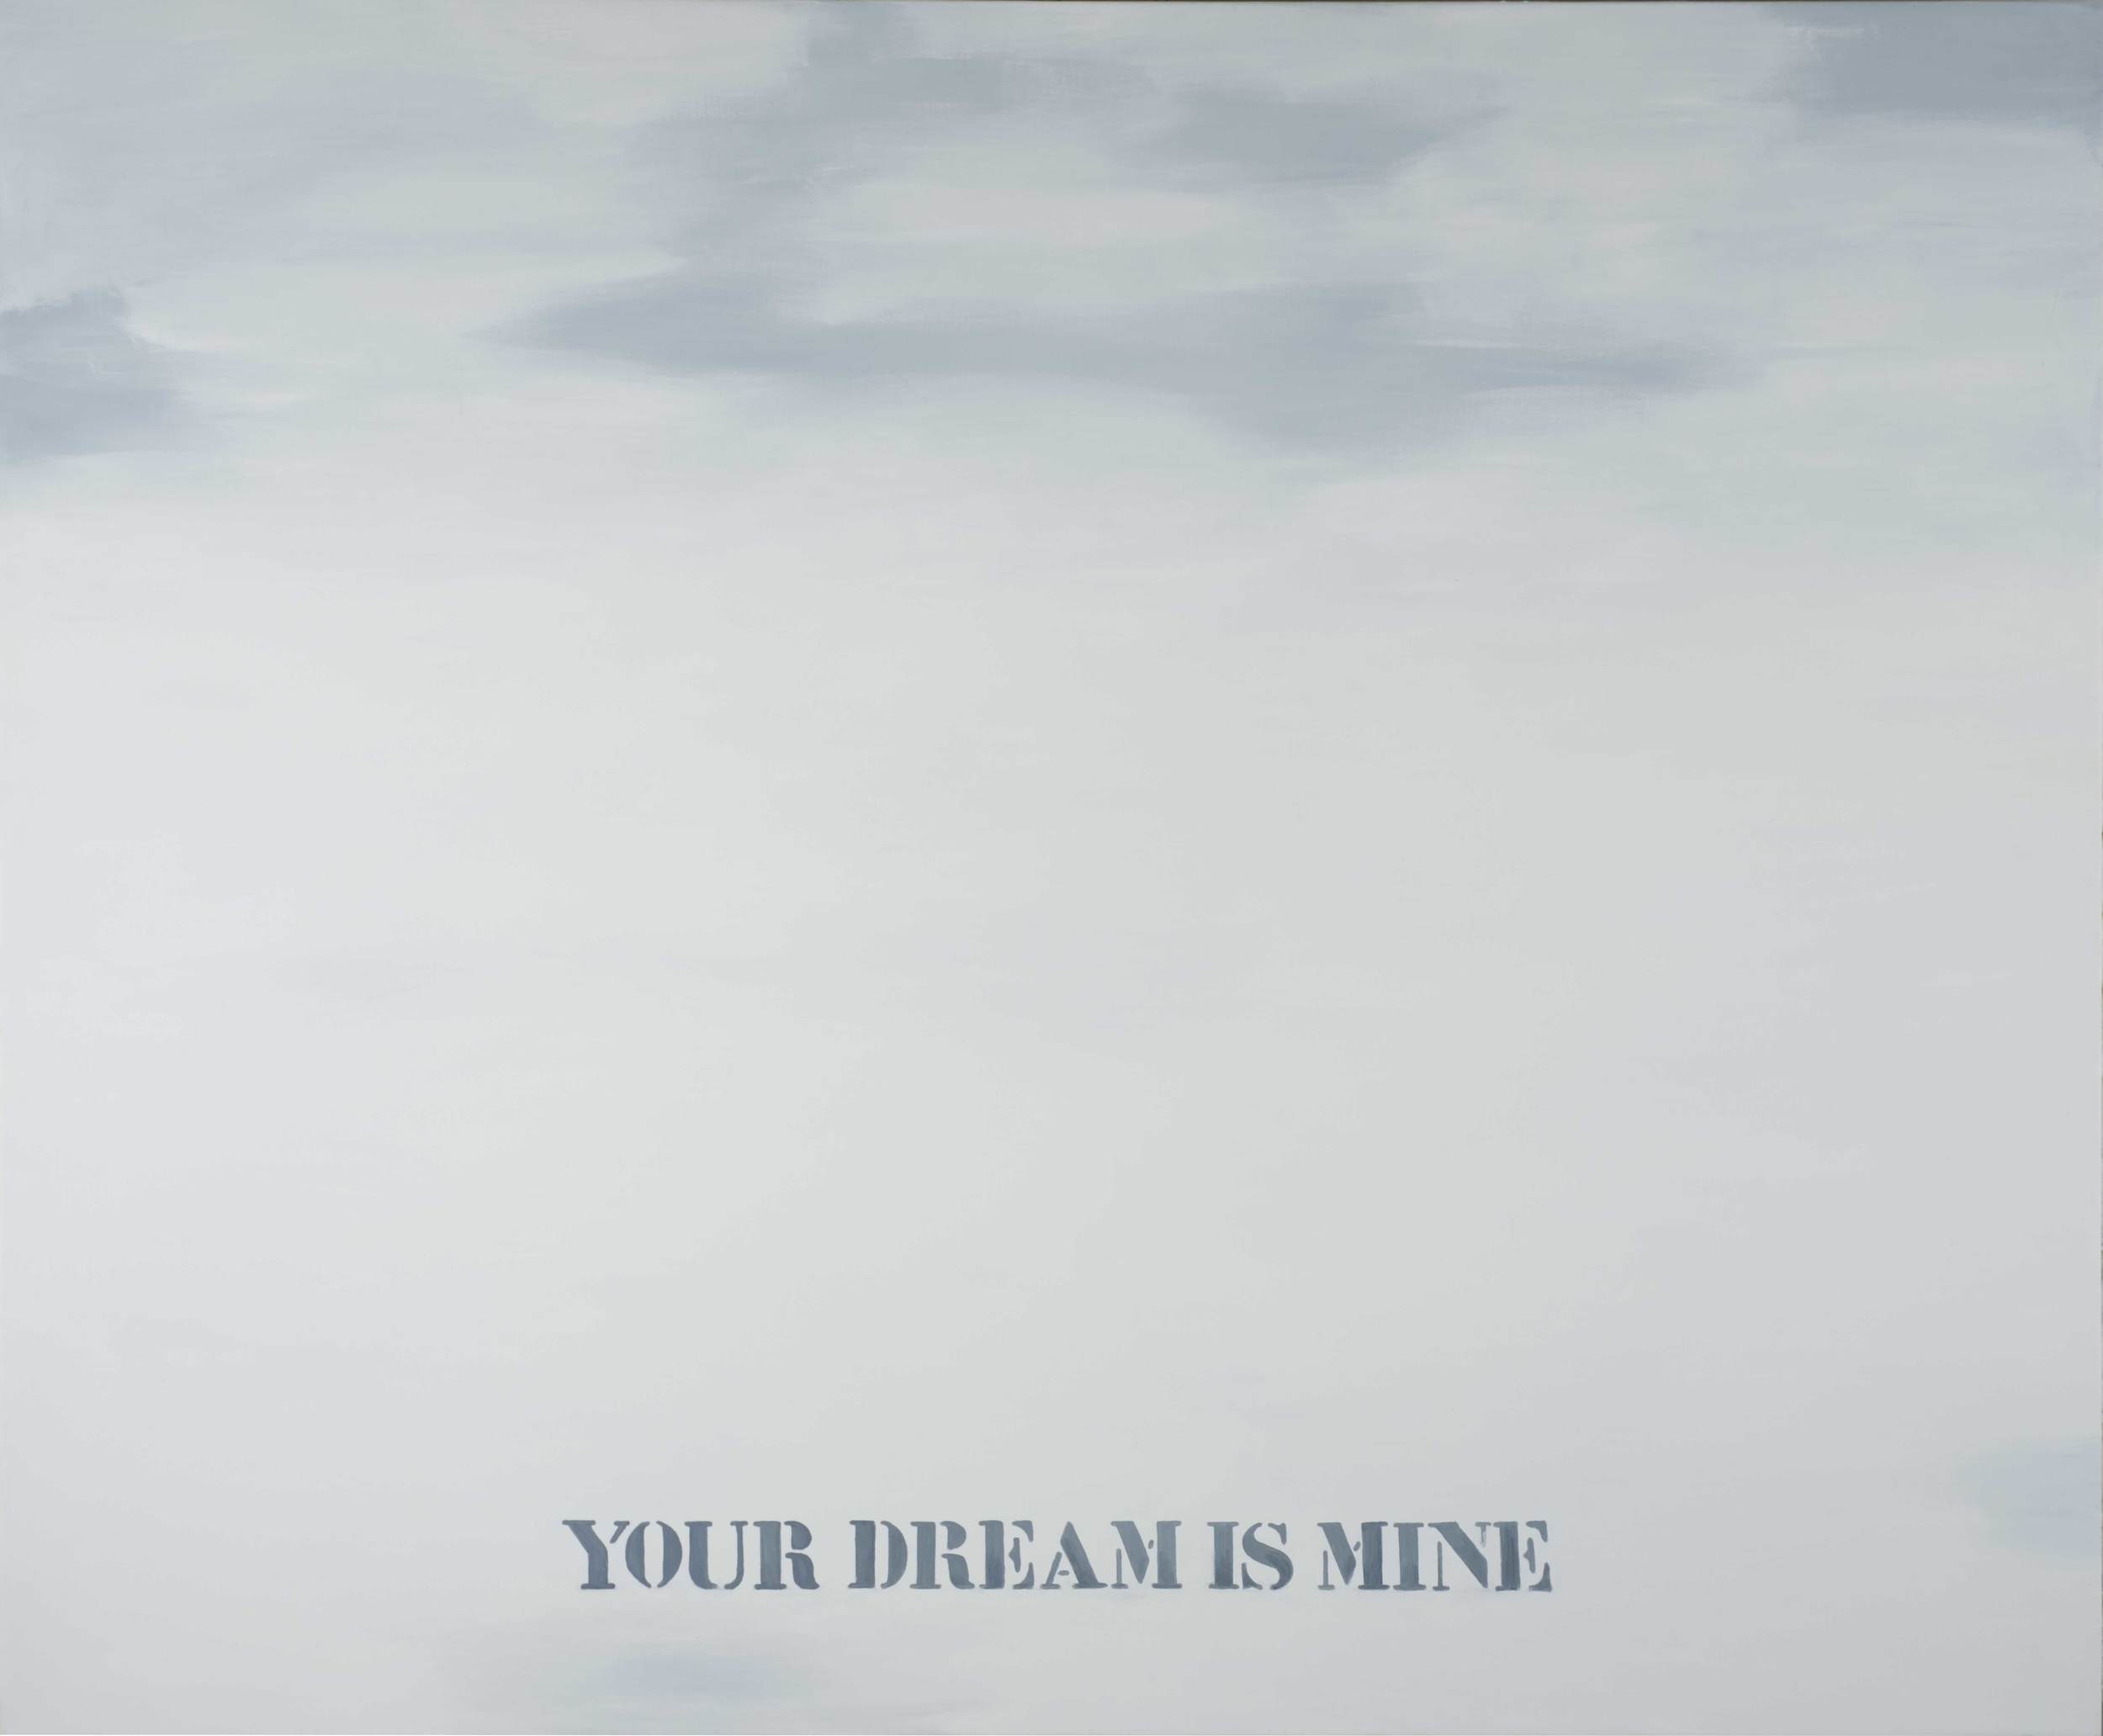 Your dream is mine